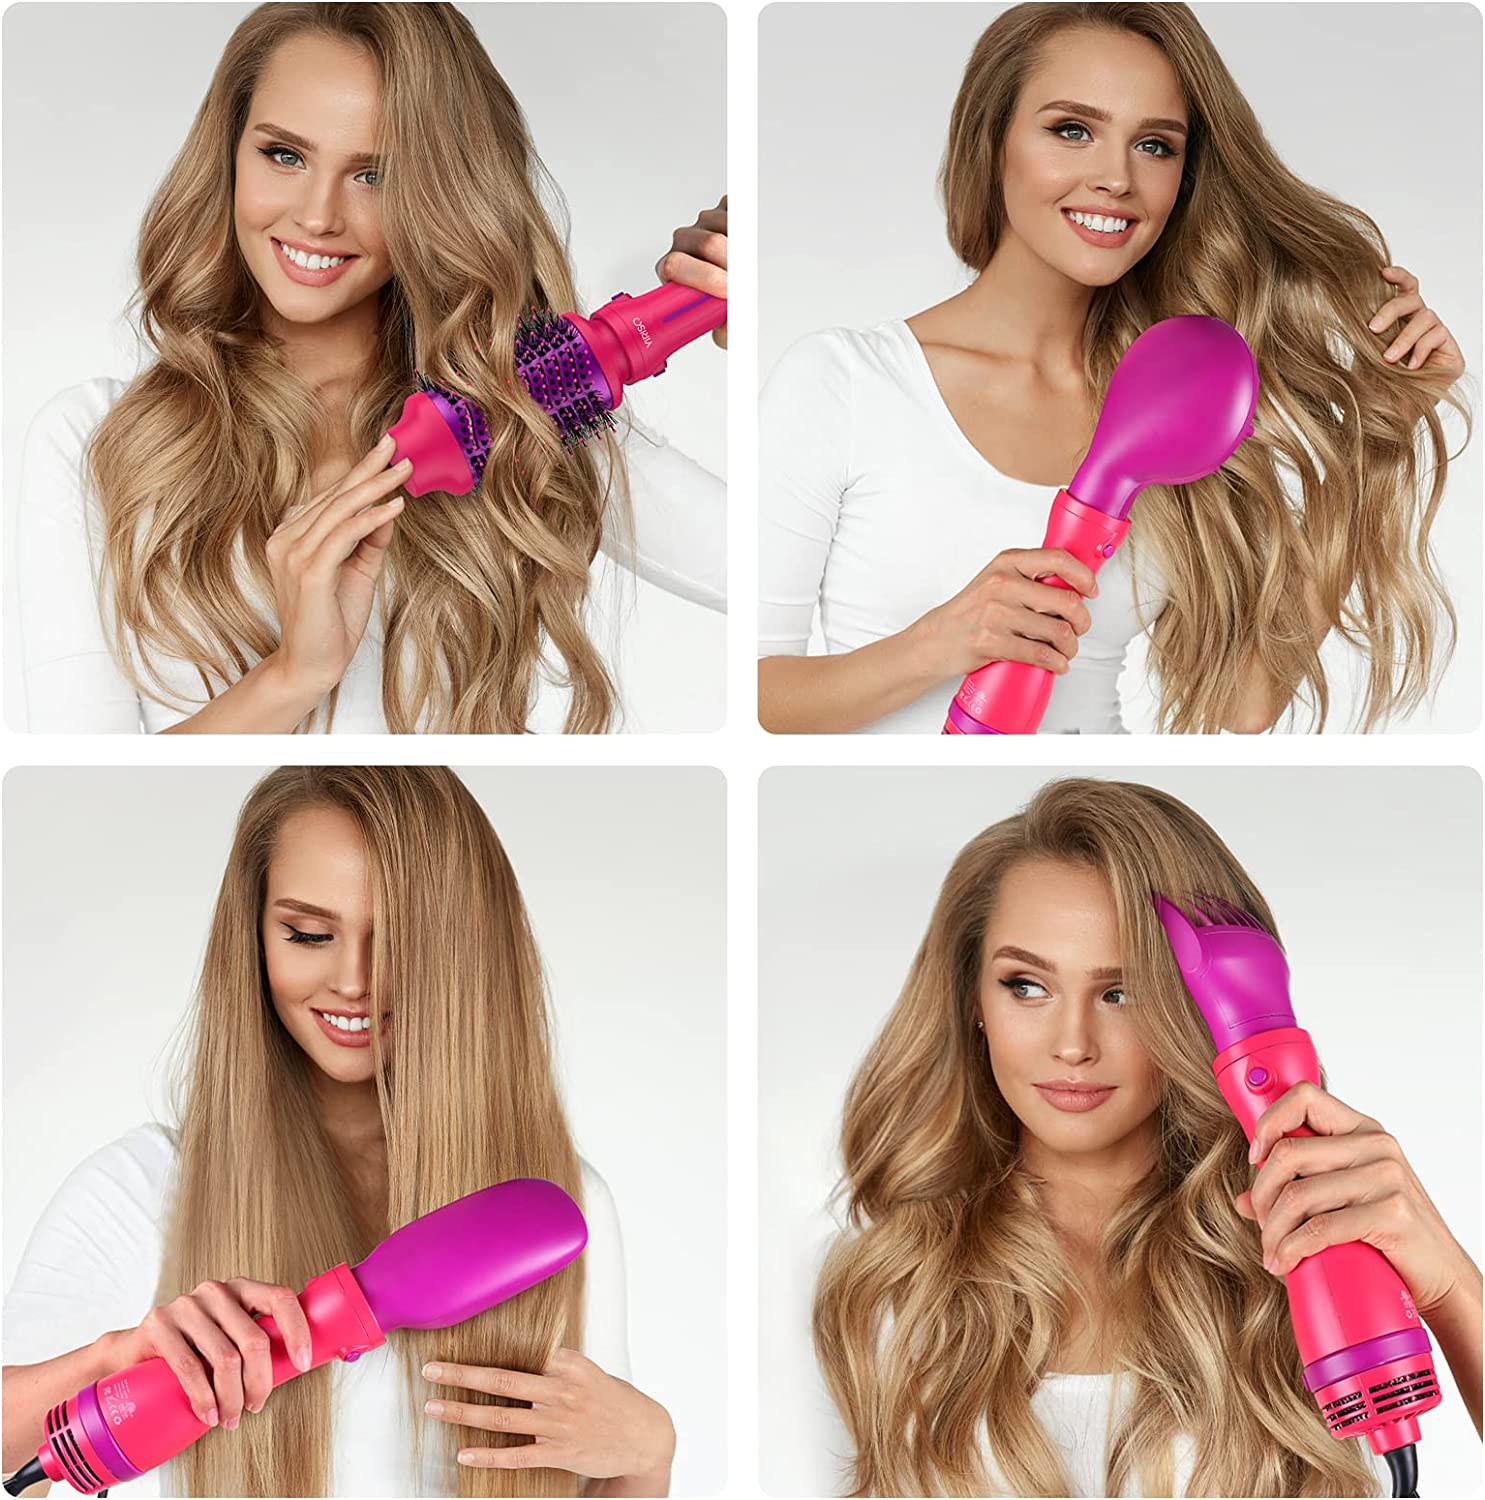 4-In-1: Blow Dryer Brush| Large Oval Brush| Cushioned Straightening Brush & Diffuser 